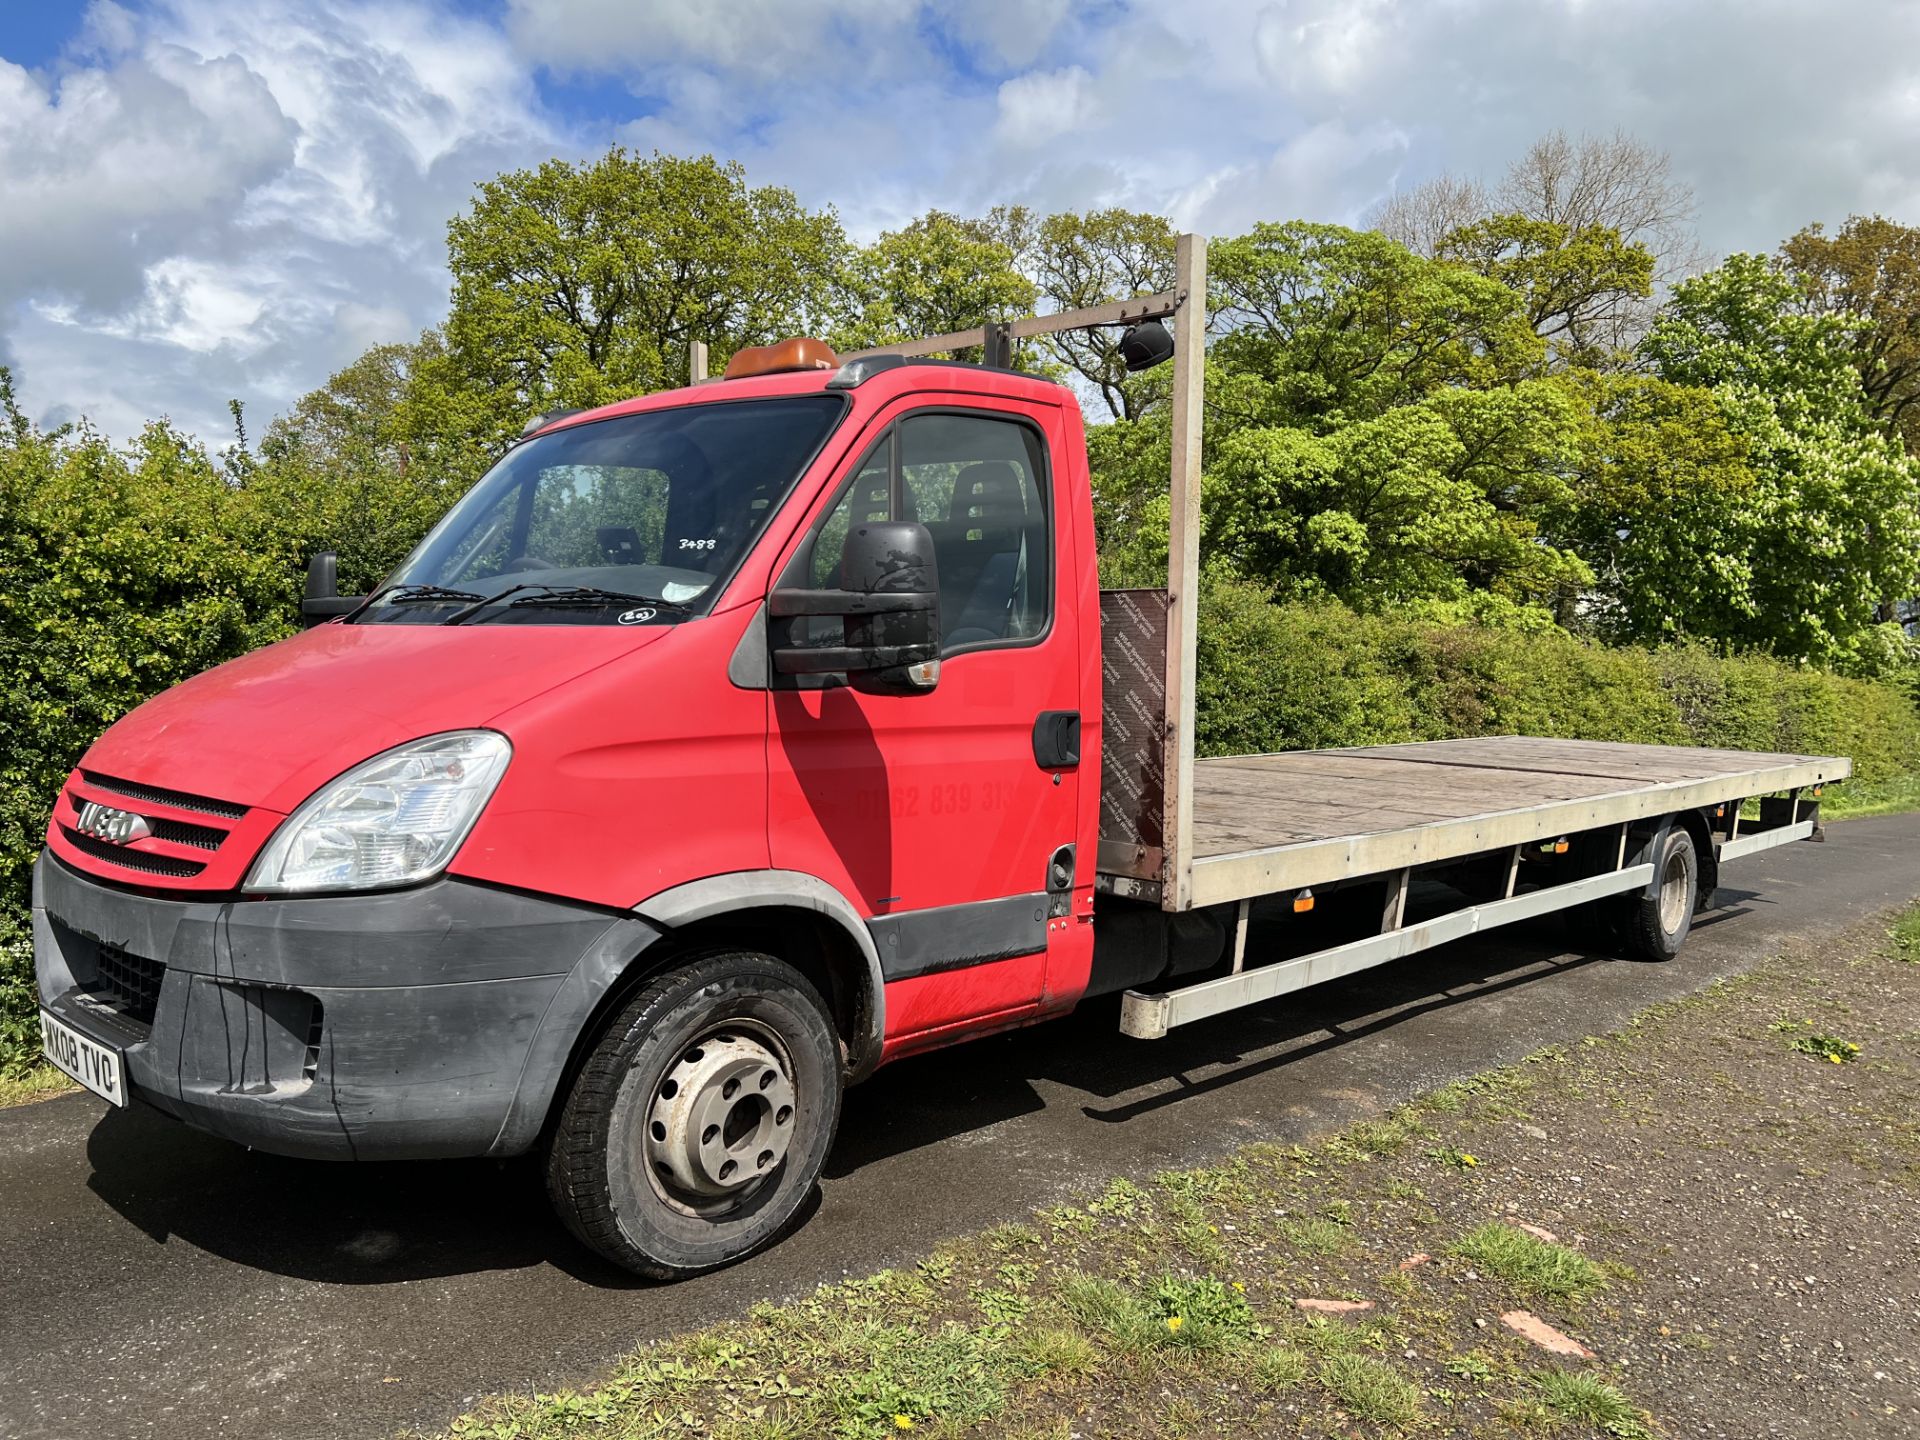 2008 IVECO DAILY 65C18 8M FLAT BED PICK UP TRUCK STARTS RUNS & DRIVES  8M FLATBED ALUMINIUM BODY - Image 5 of 5